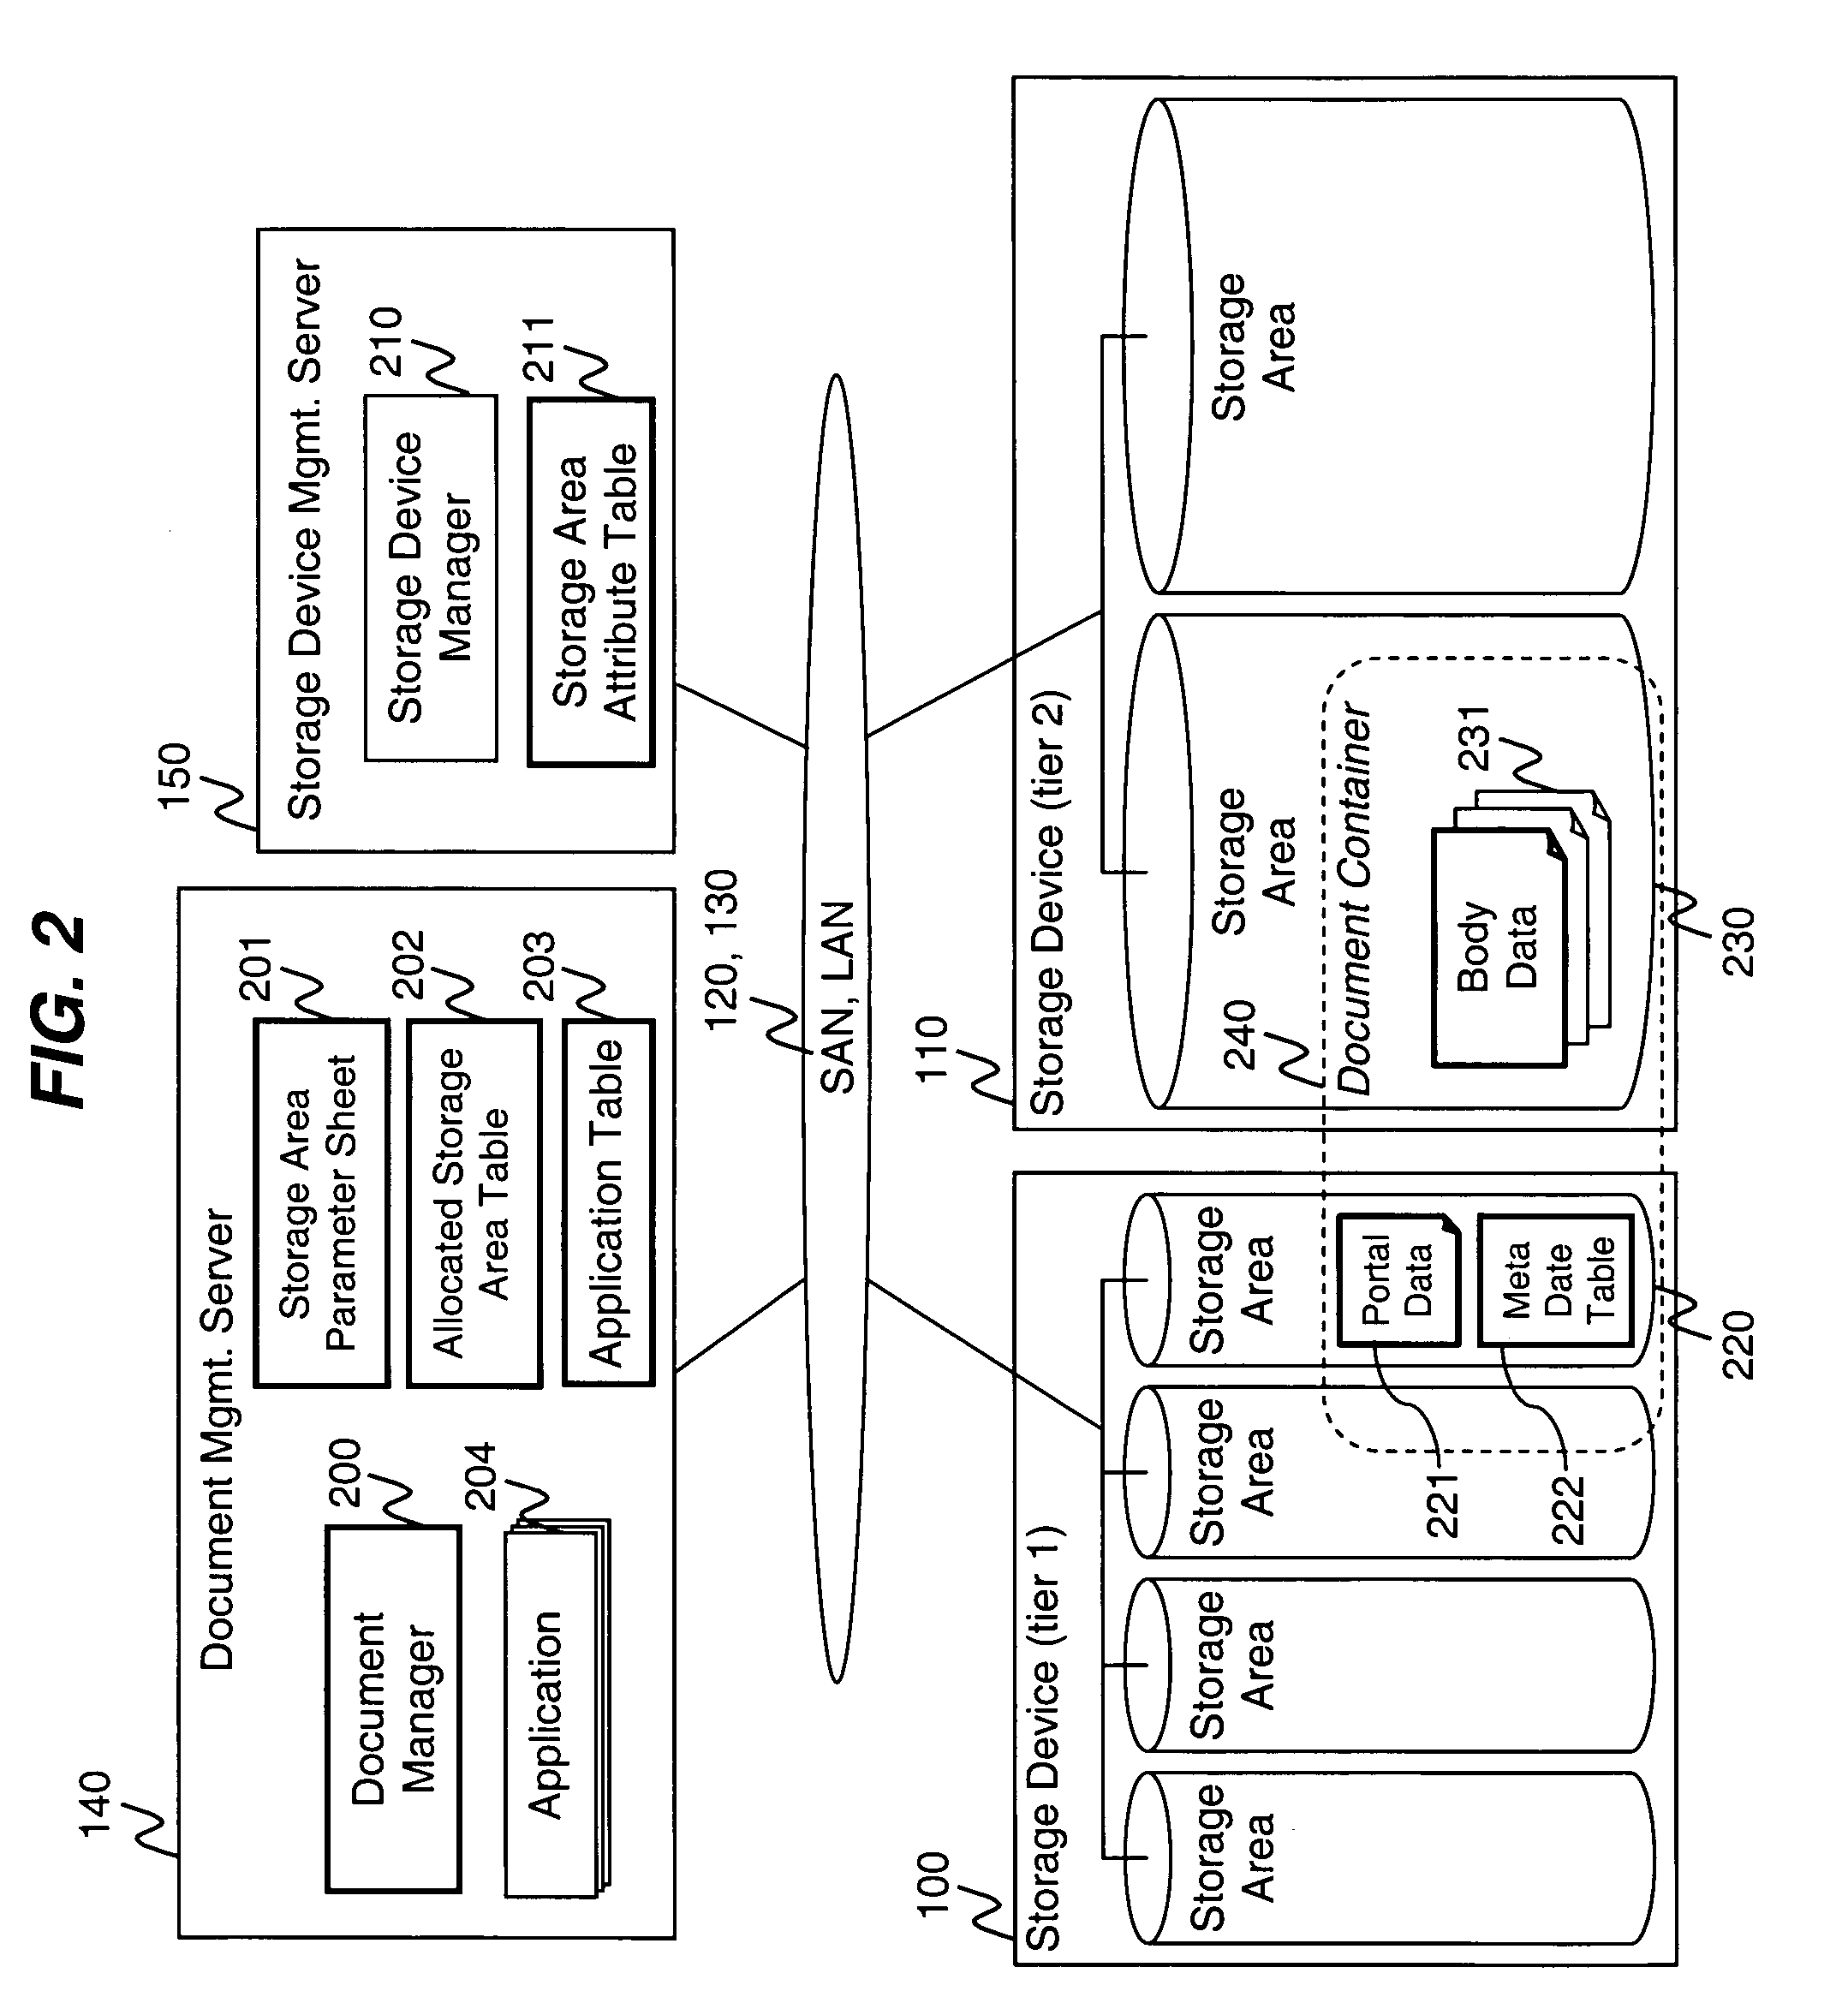 Computerized system and method for document management